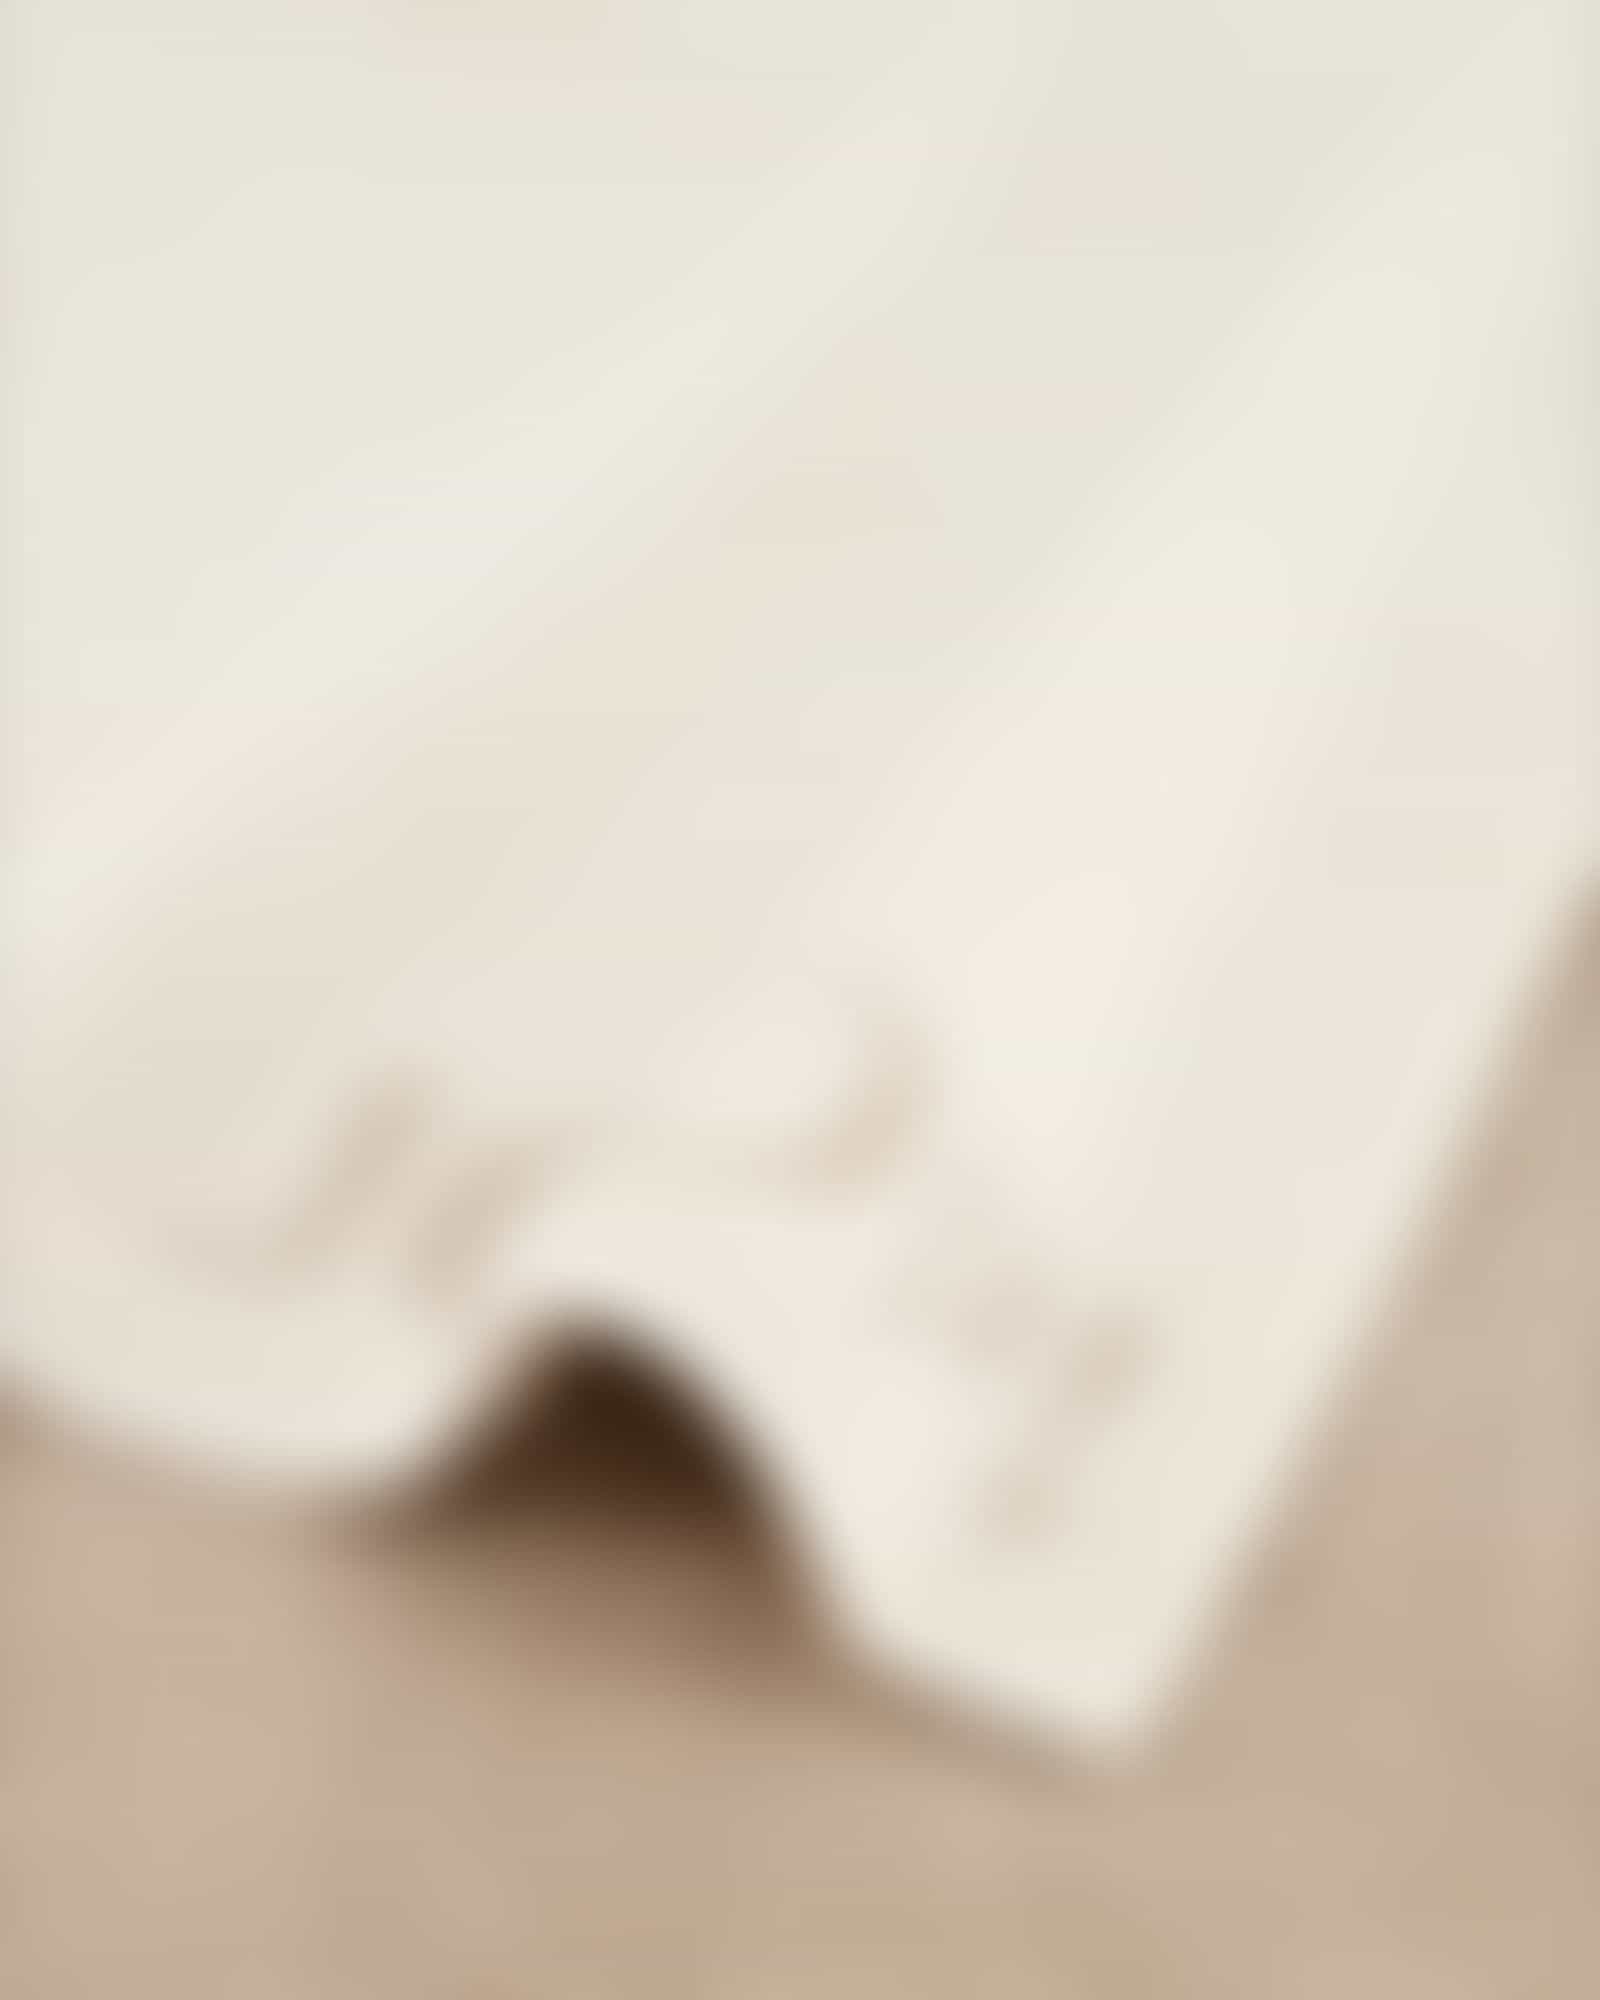 JOOP! Classic - Doubleface 1600 - Farbe: Creme - 36 - Handtuch 50x100 cm